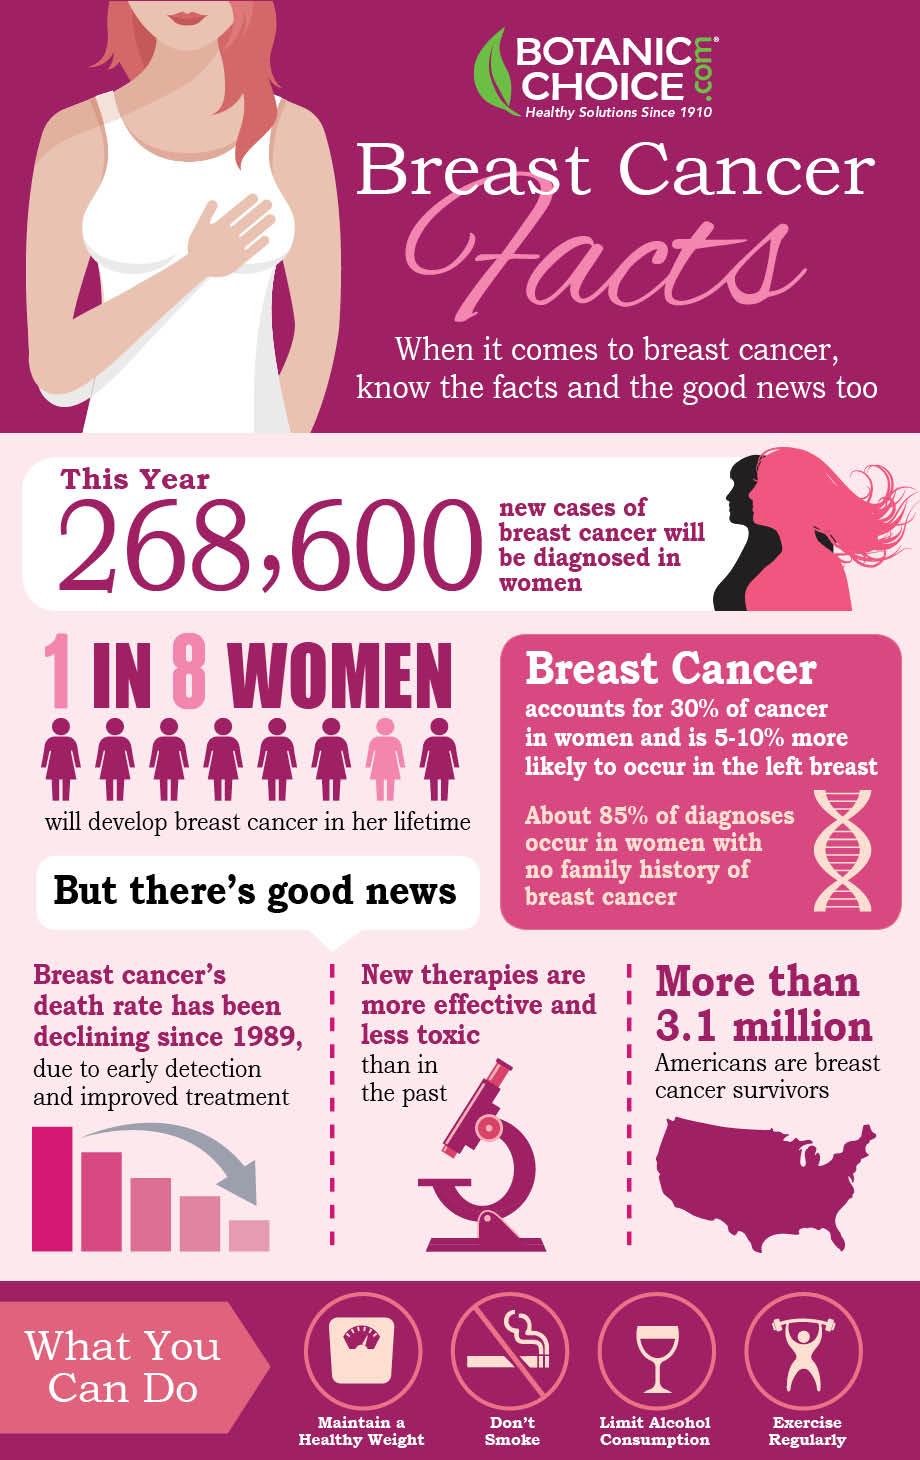 Breast Cancer Tips and Facts